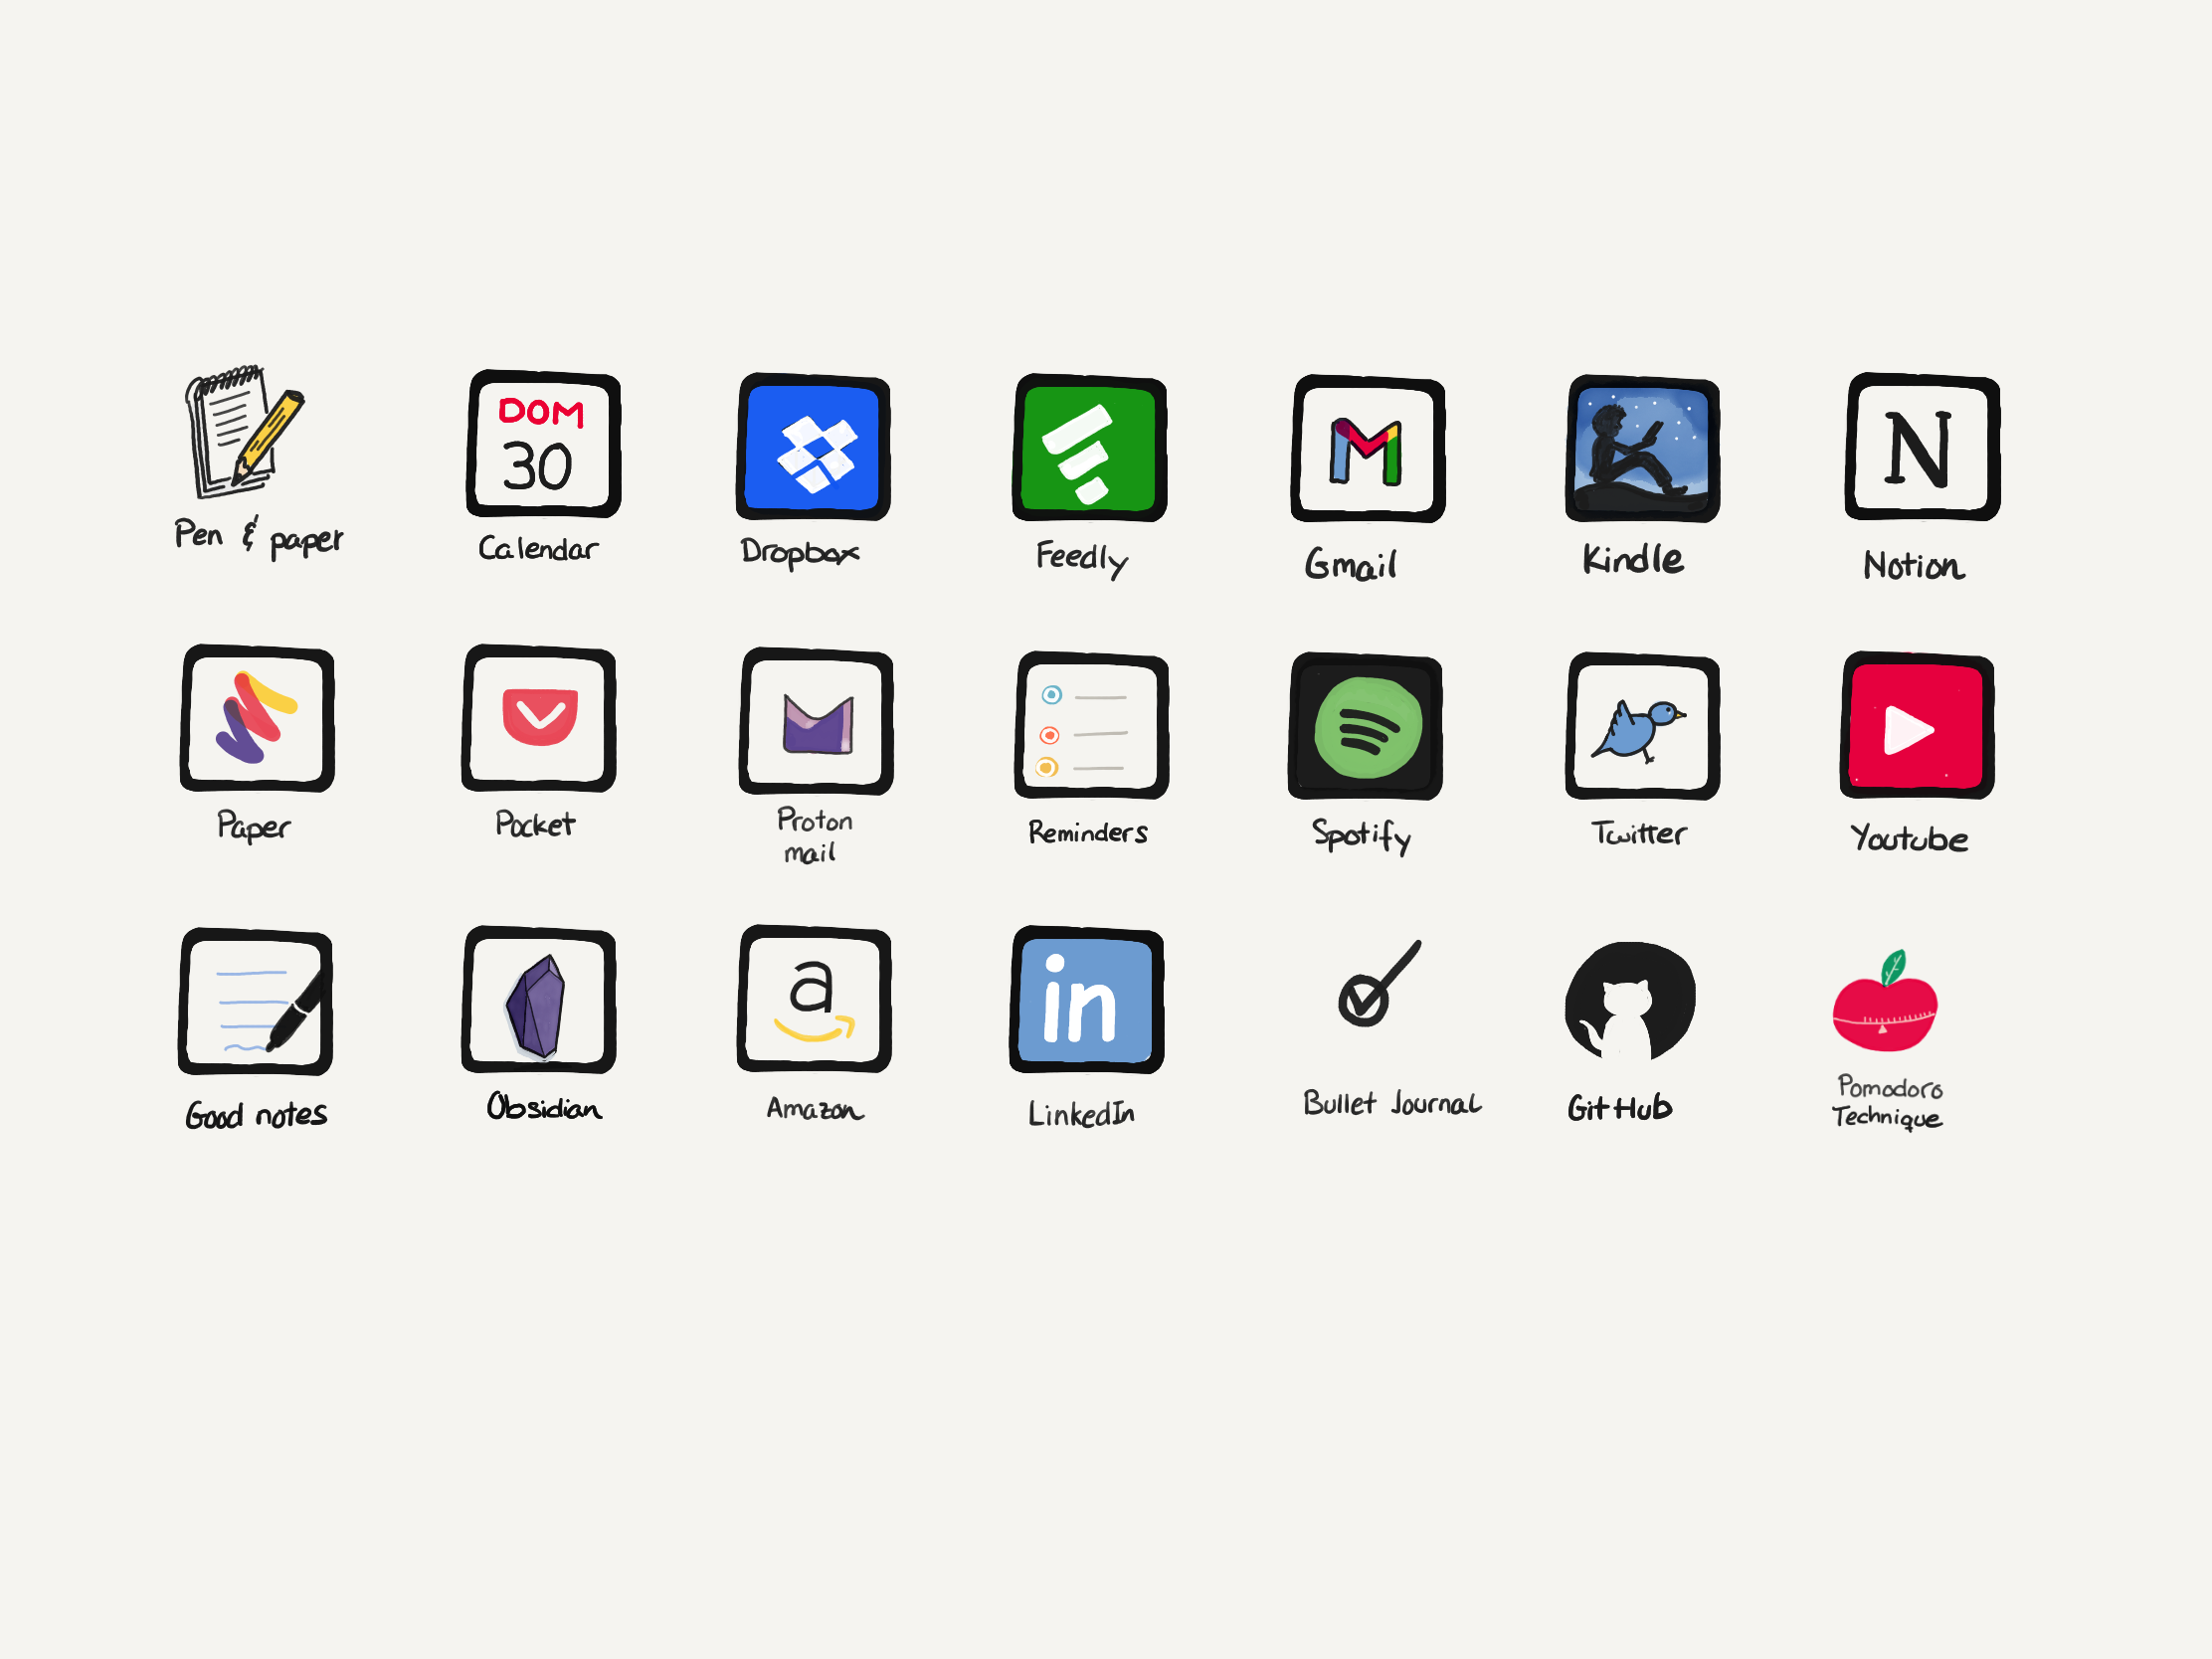 All the tools I use at my productivity system